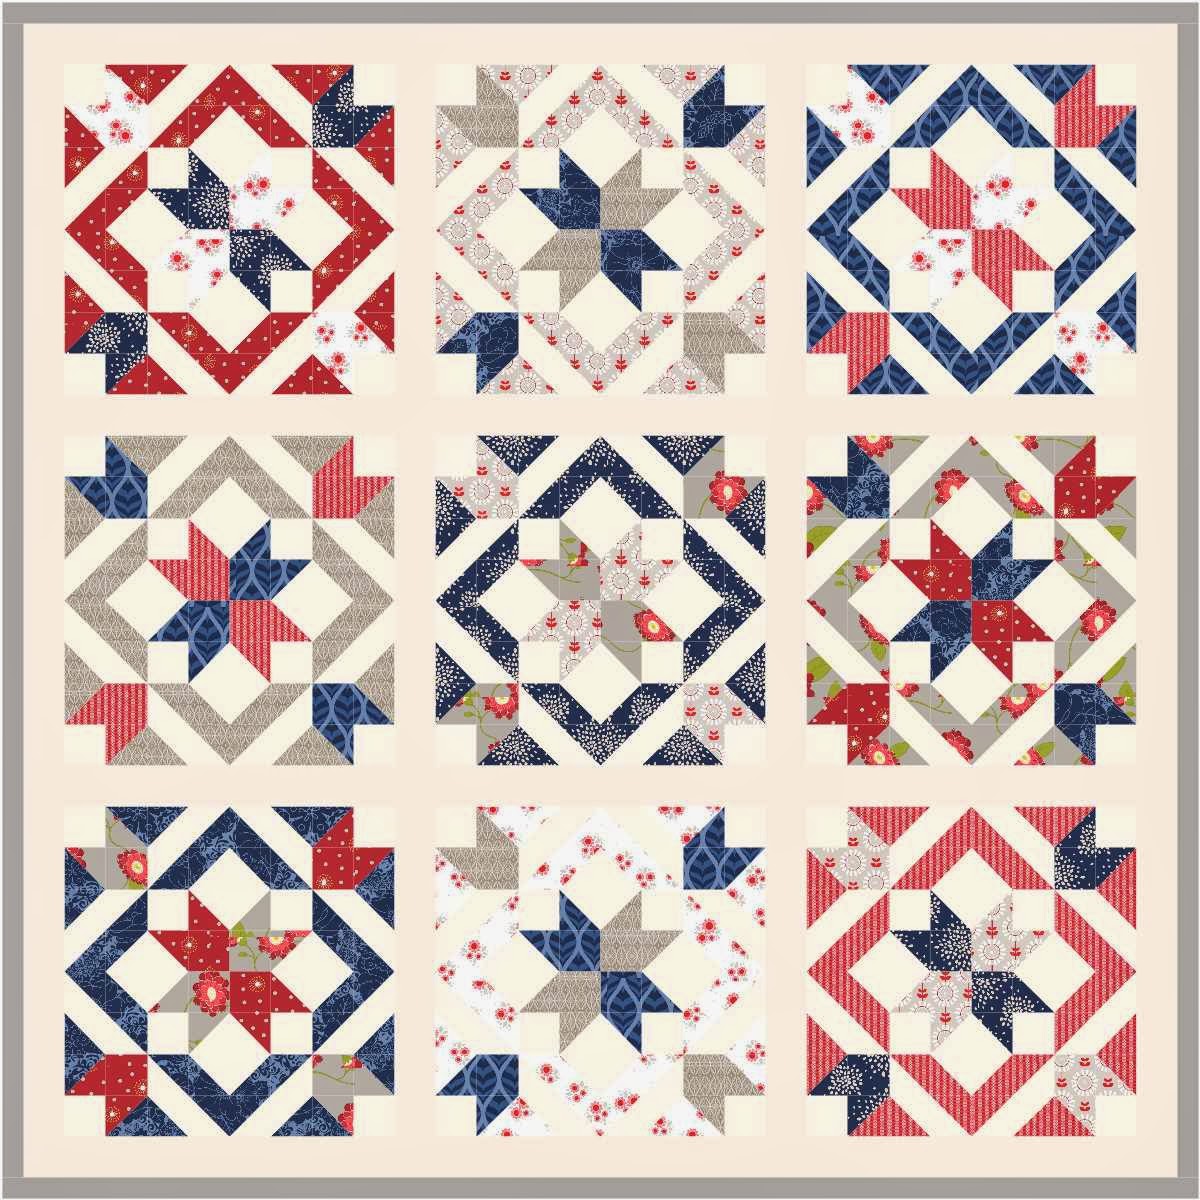 "Star Light Star Bright Quilt Along" designed by Melissa Corry from Happy Quilting Melissa